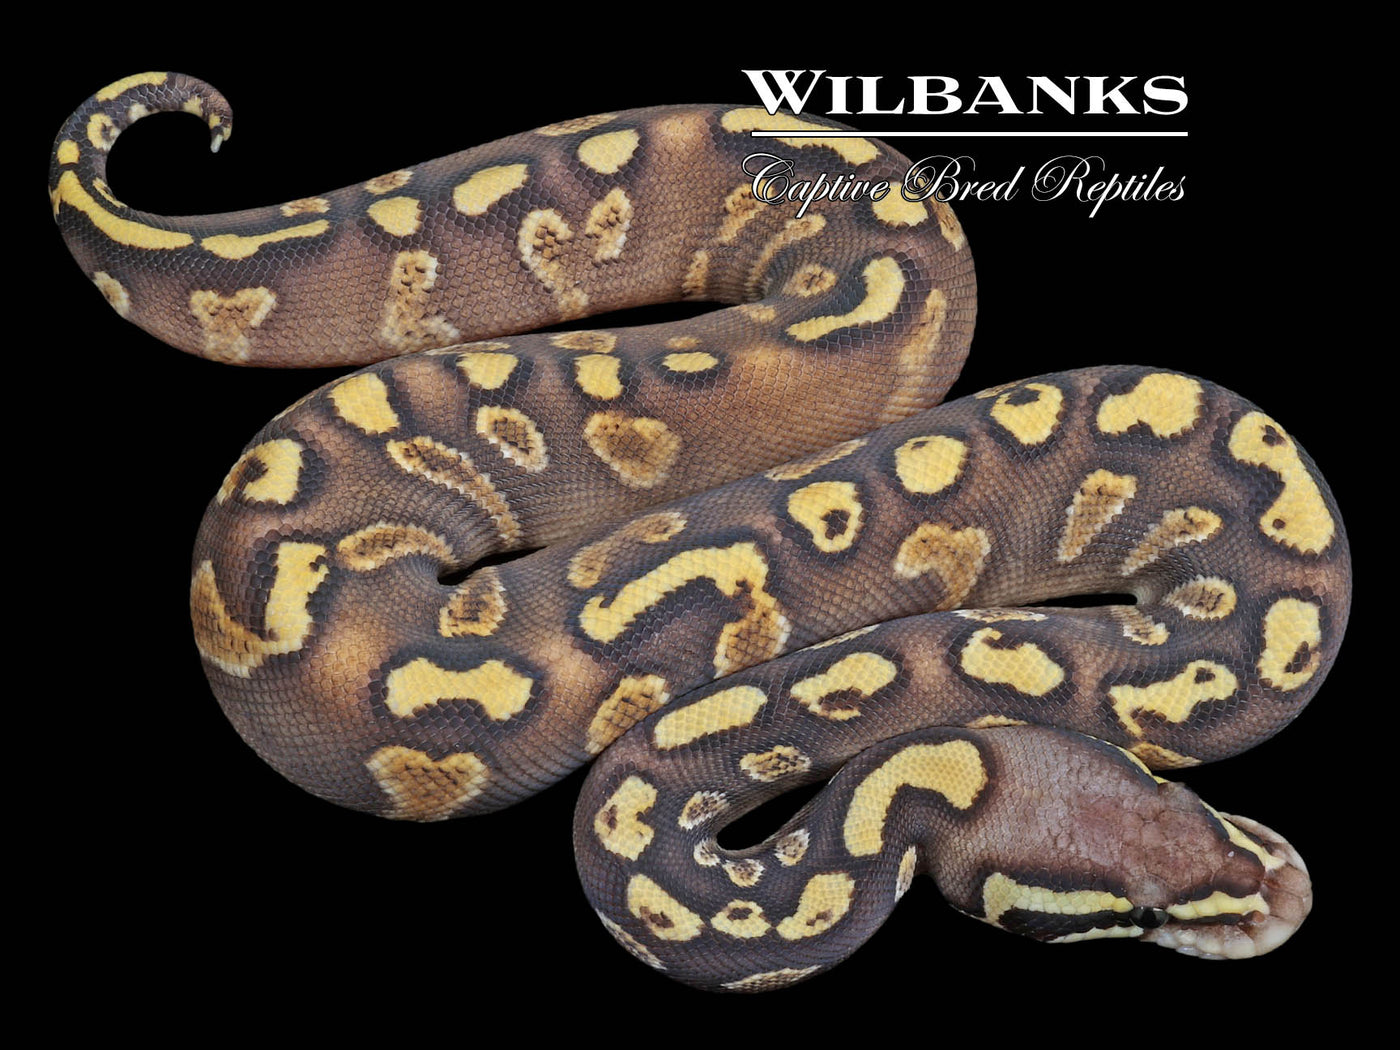 Mojave GHI Yellow Belly Pastel Ball Python ♀ '23